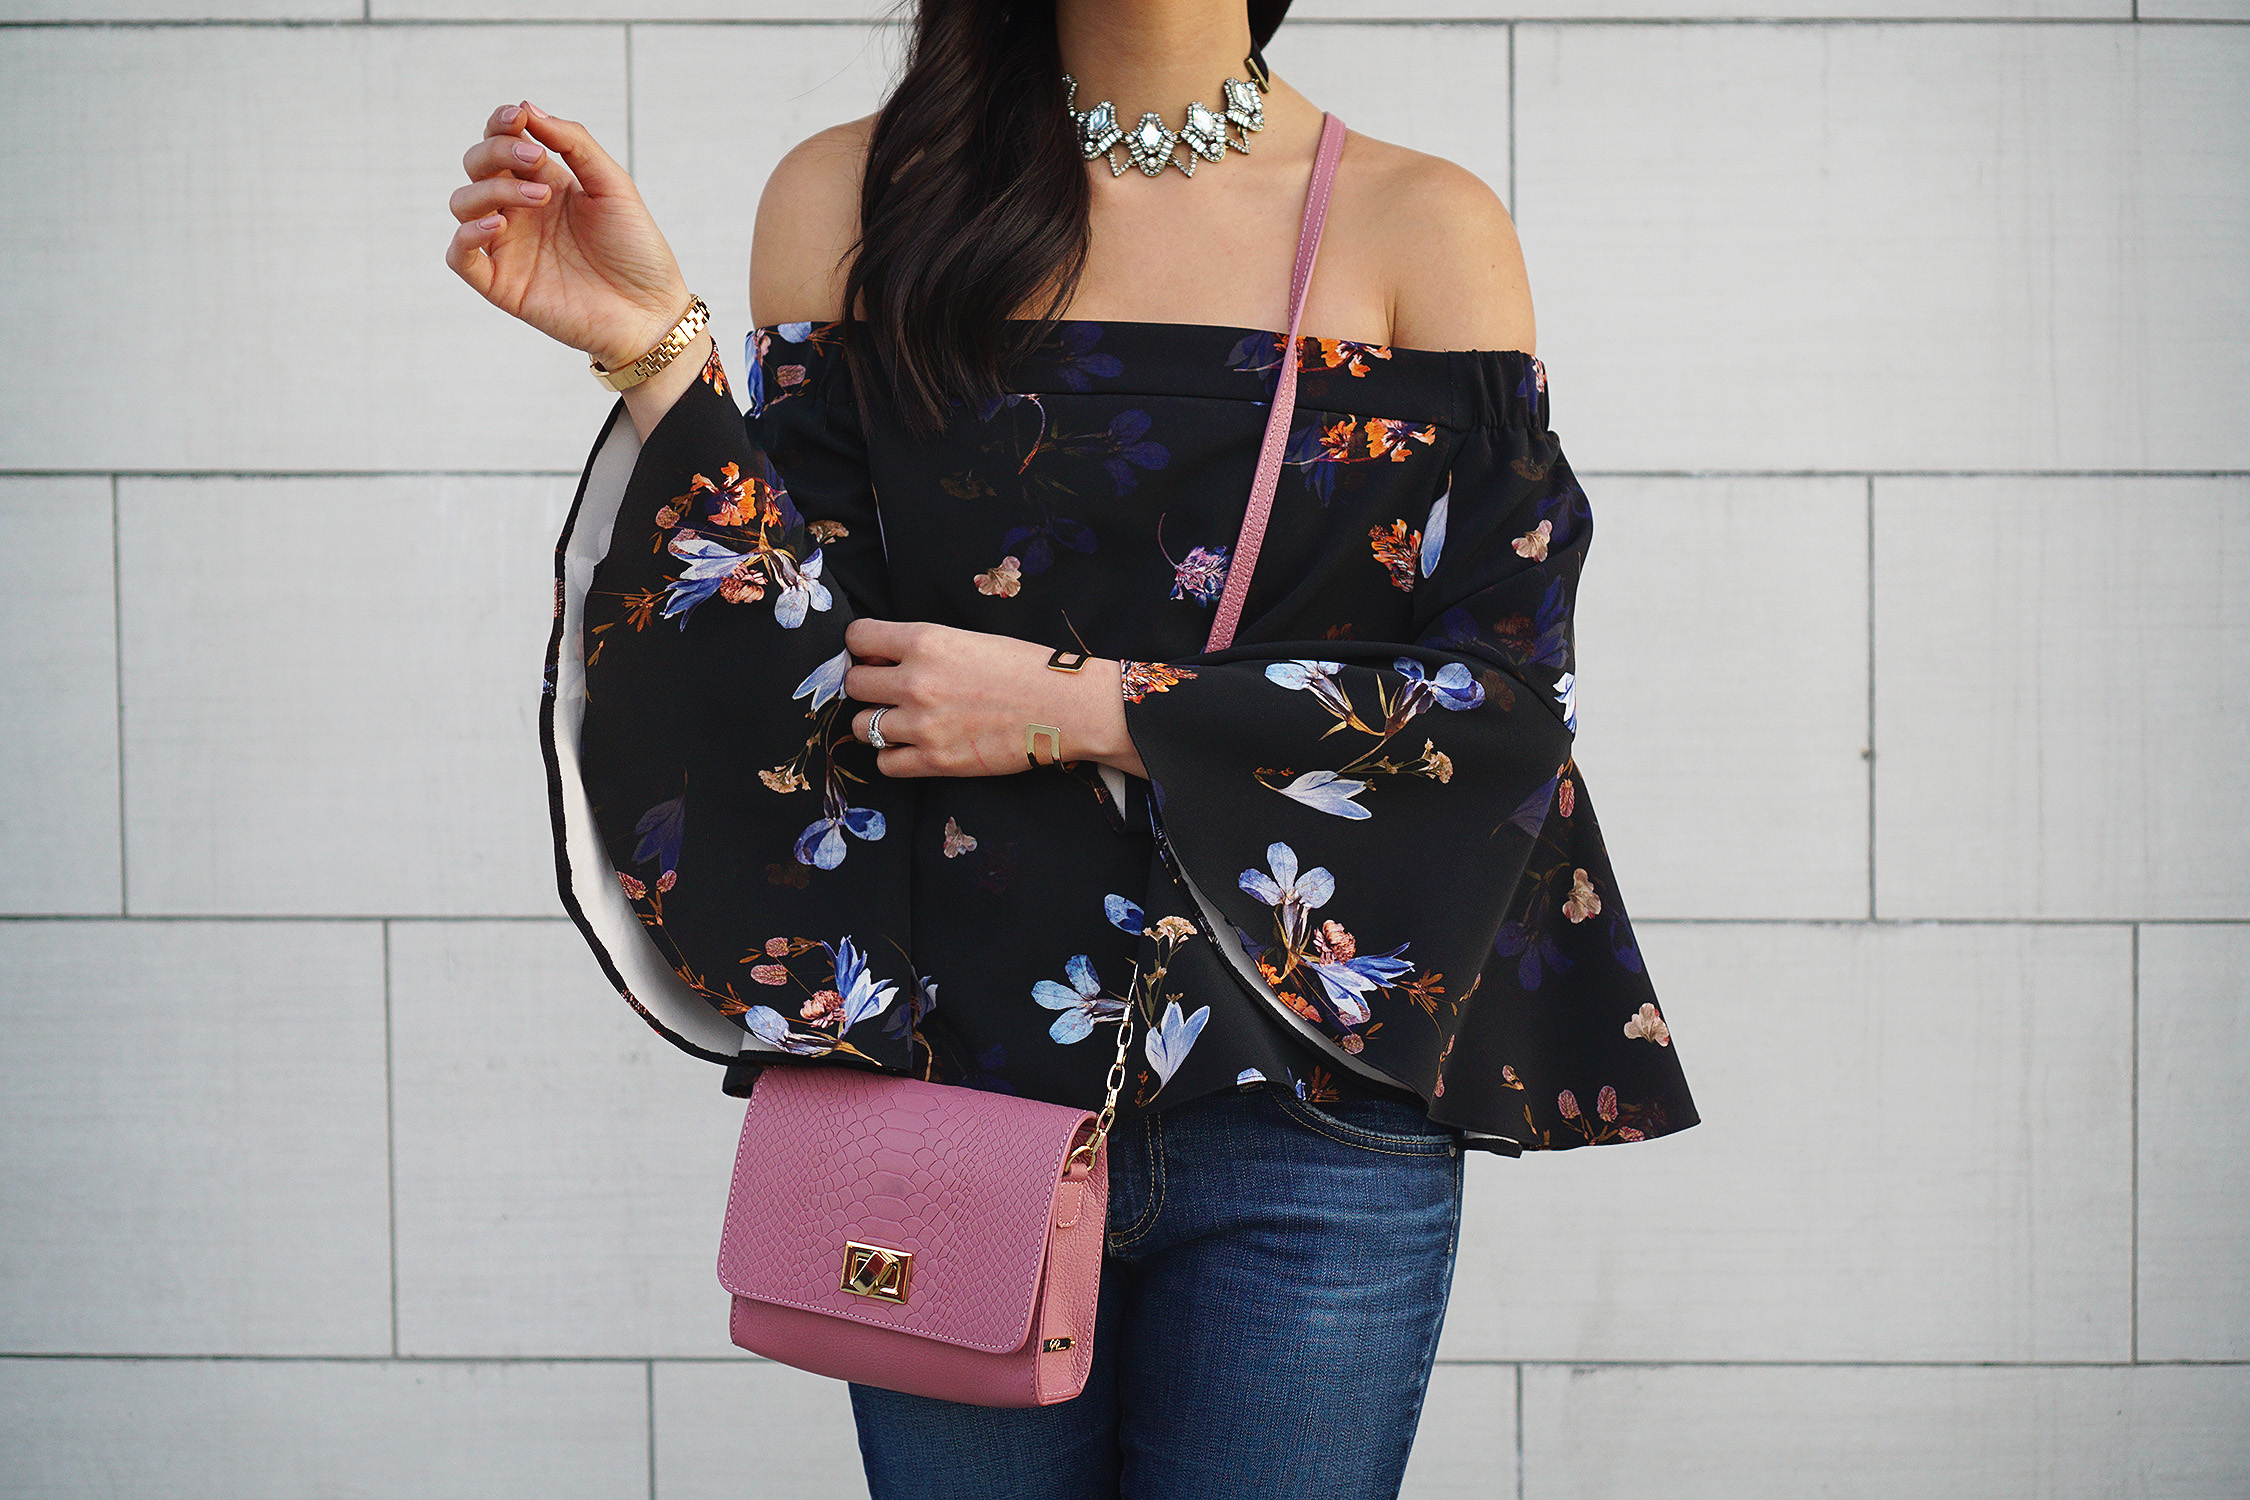 Skirt The Rules / Off the Shoulder Top